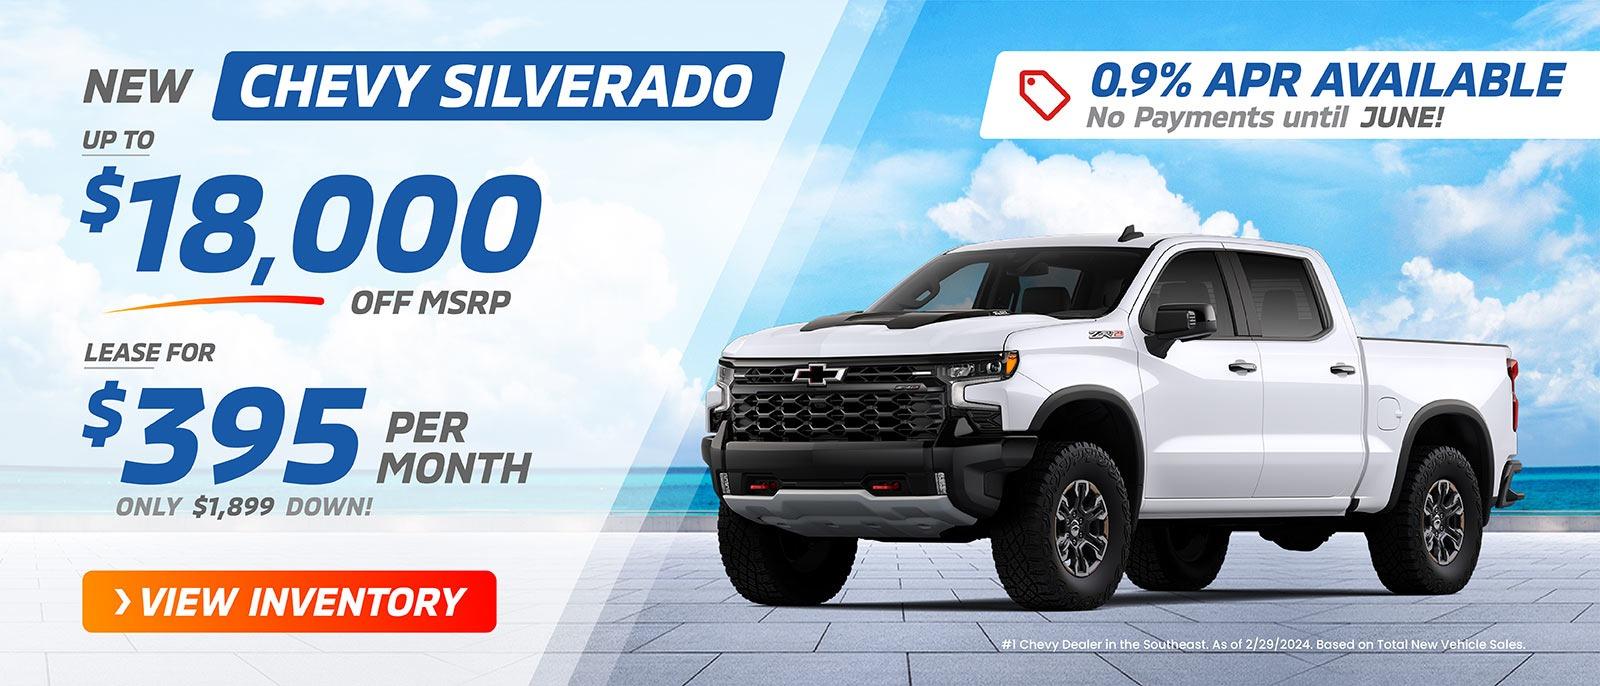 New Chevy Silverado
UPTO $14,500 OFF MSRP
FINANCING AT 0% APR AVAILABLE